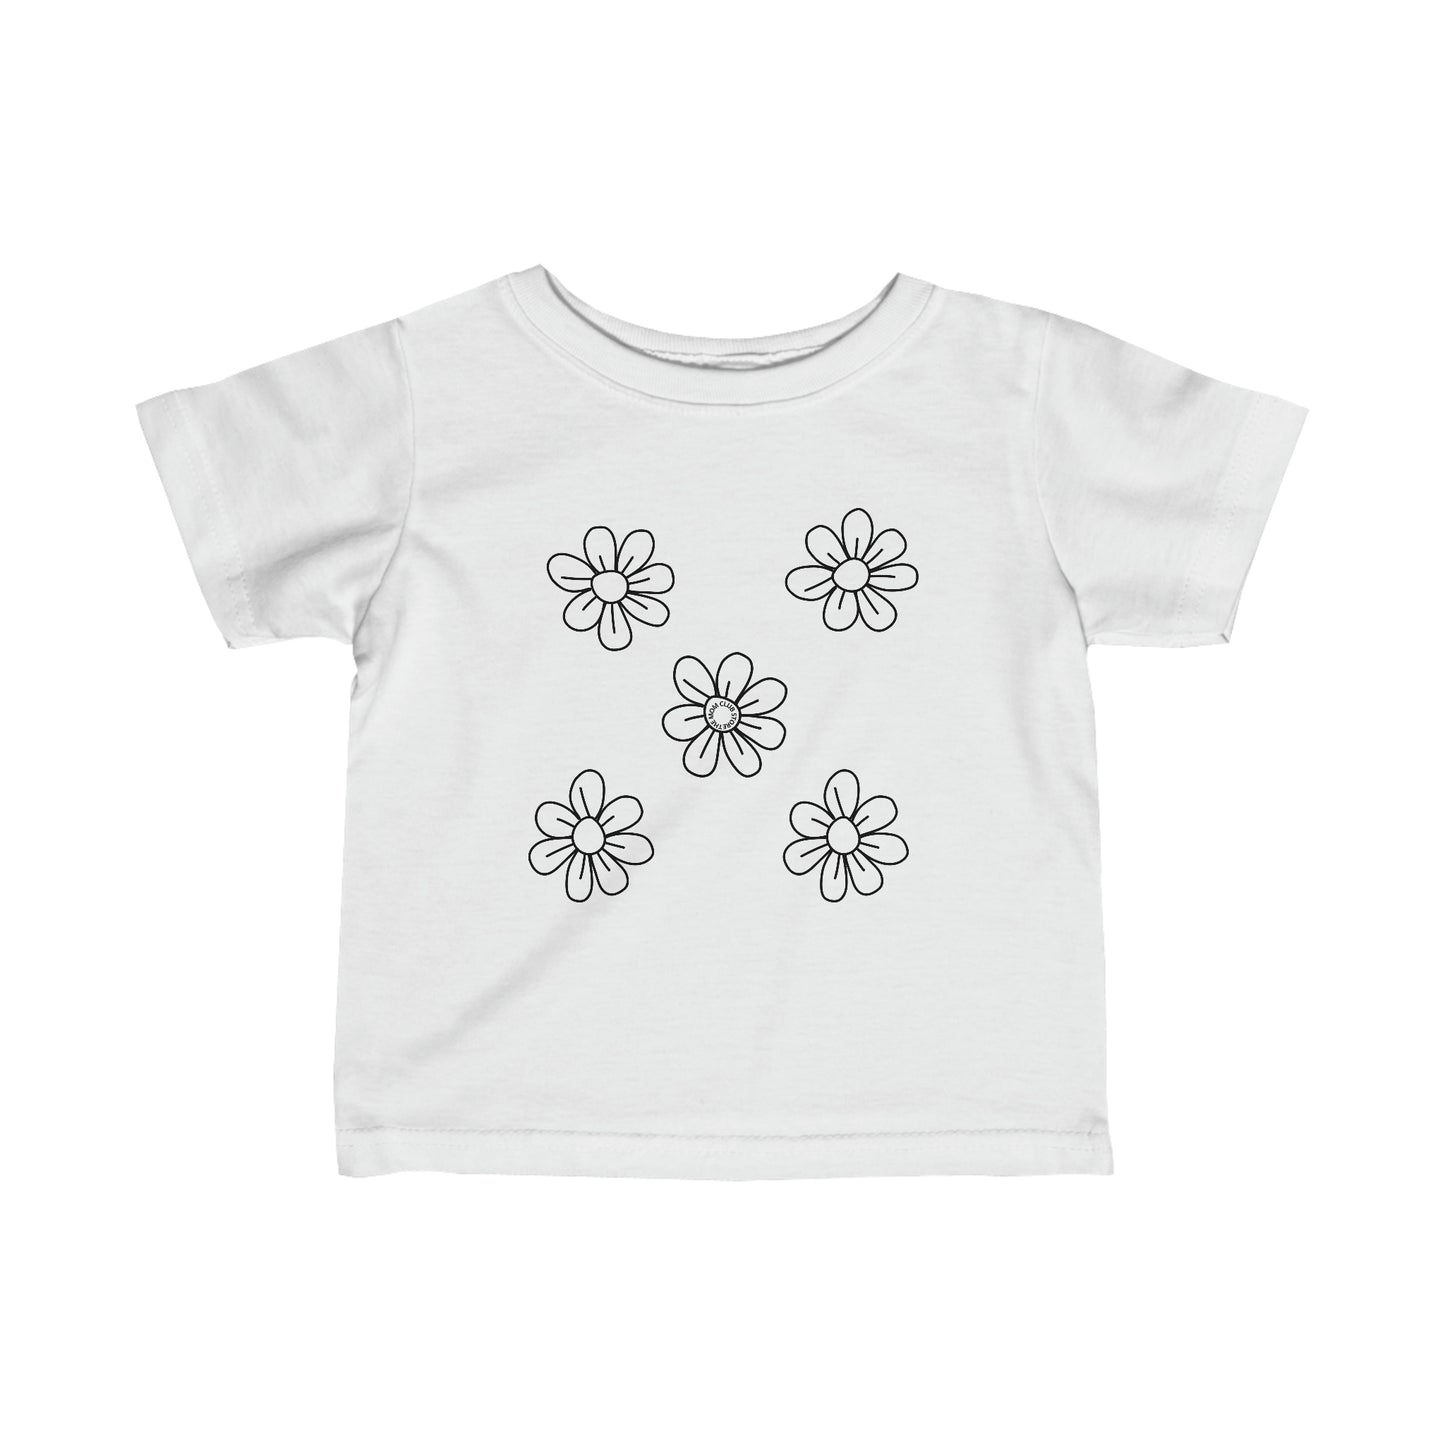 Short-sleeved t-shirt with unisex FLOWERS print for 6m-24m